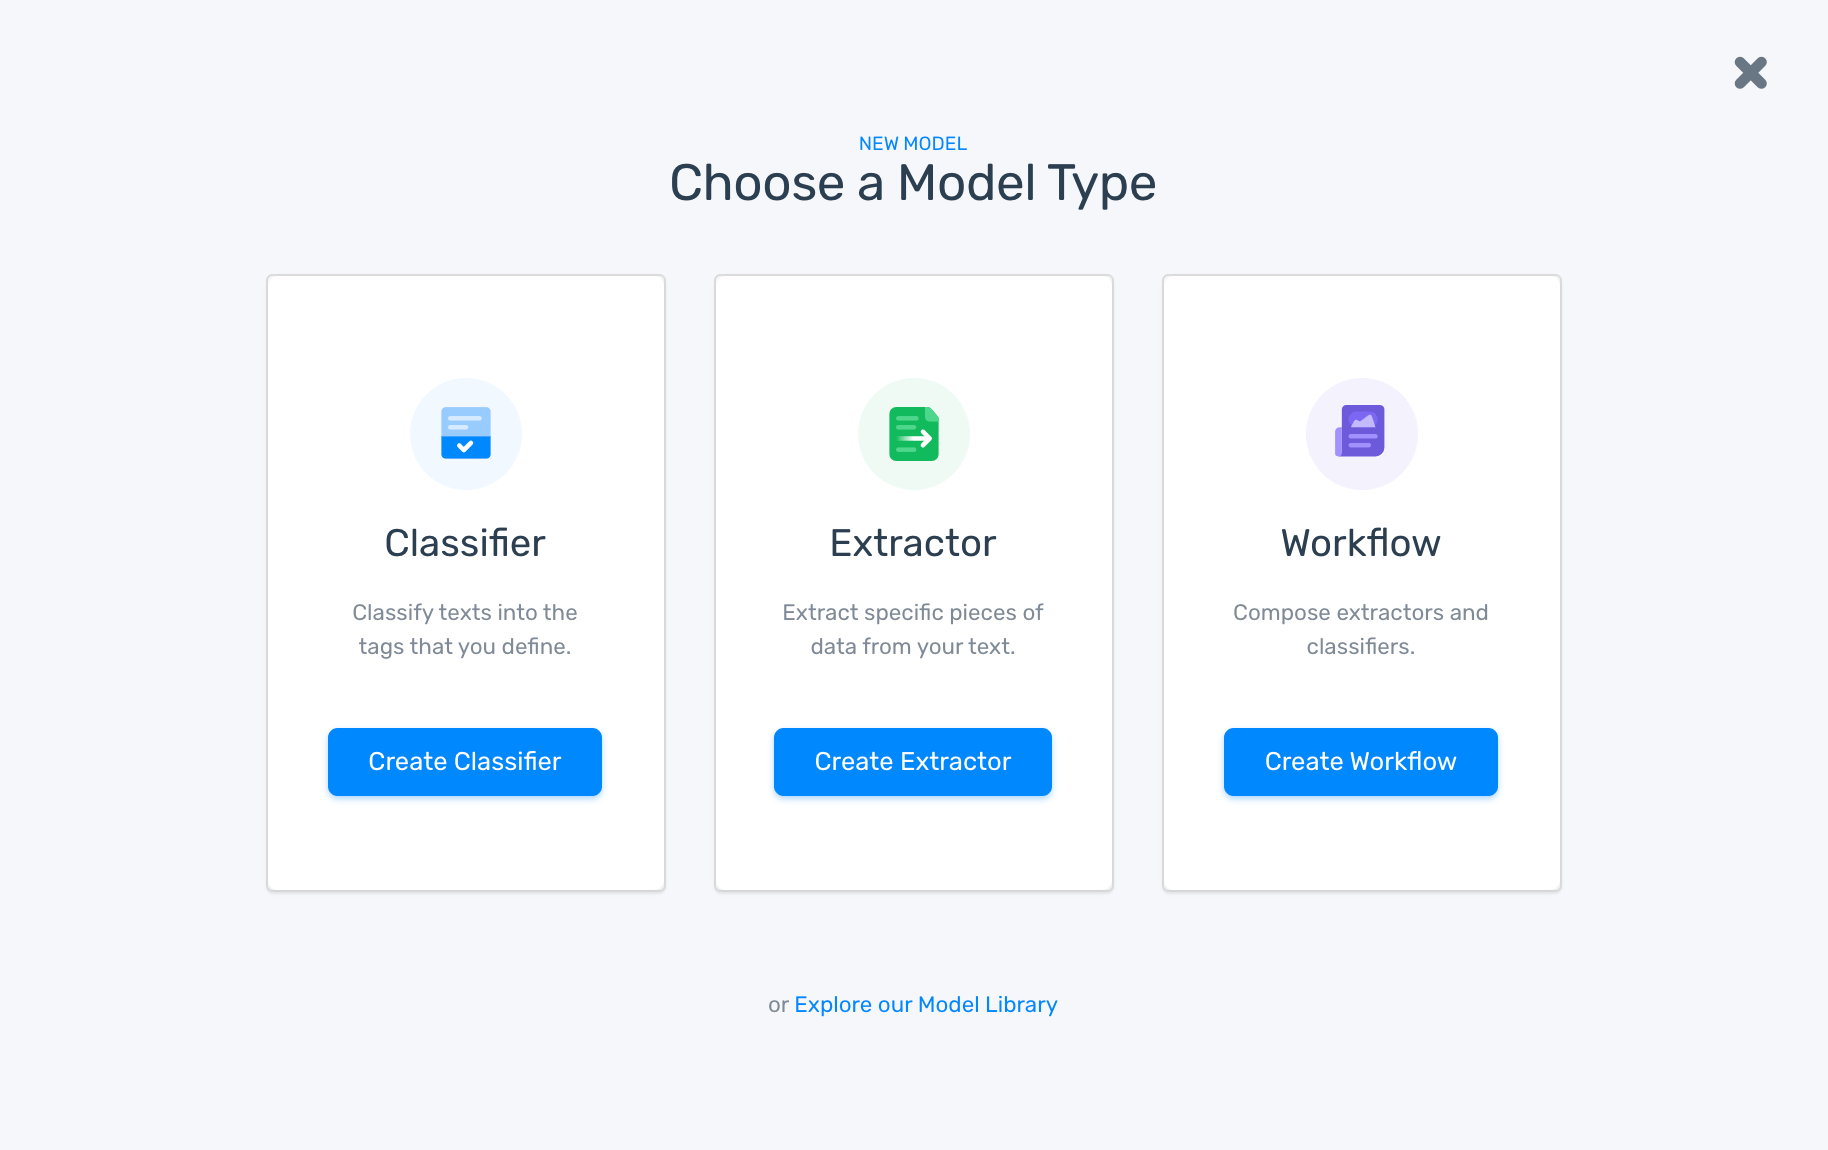 Step one: choose a model type (claasfier or extractor)